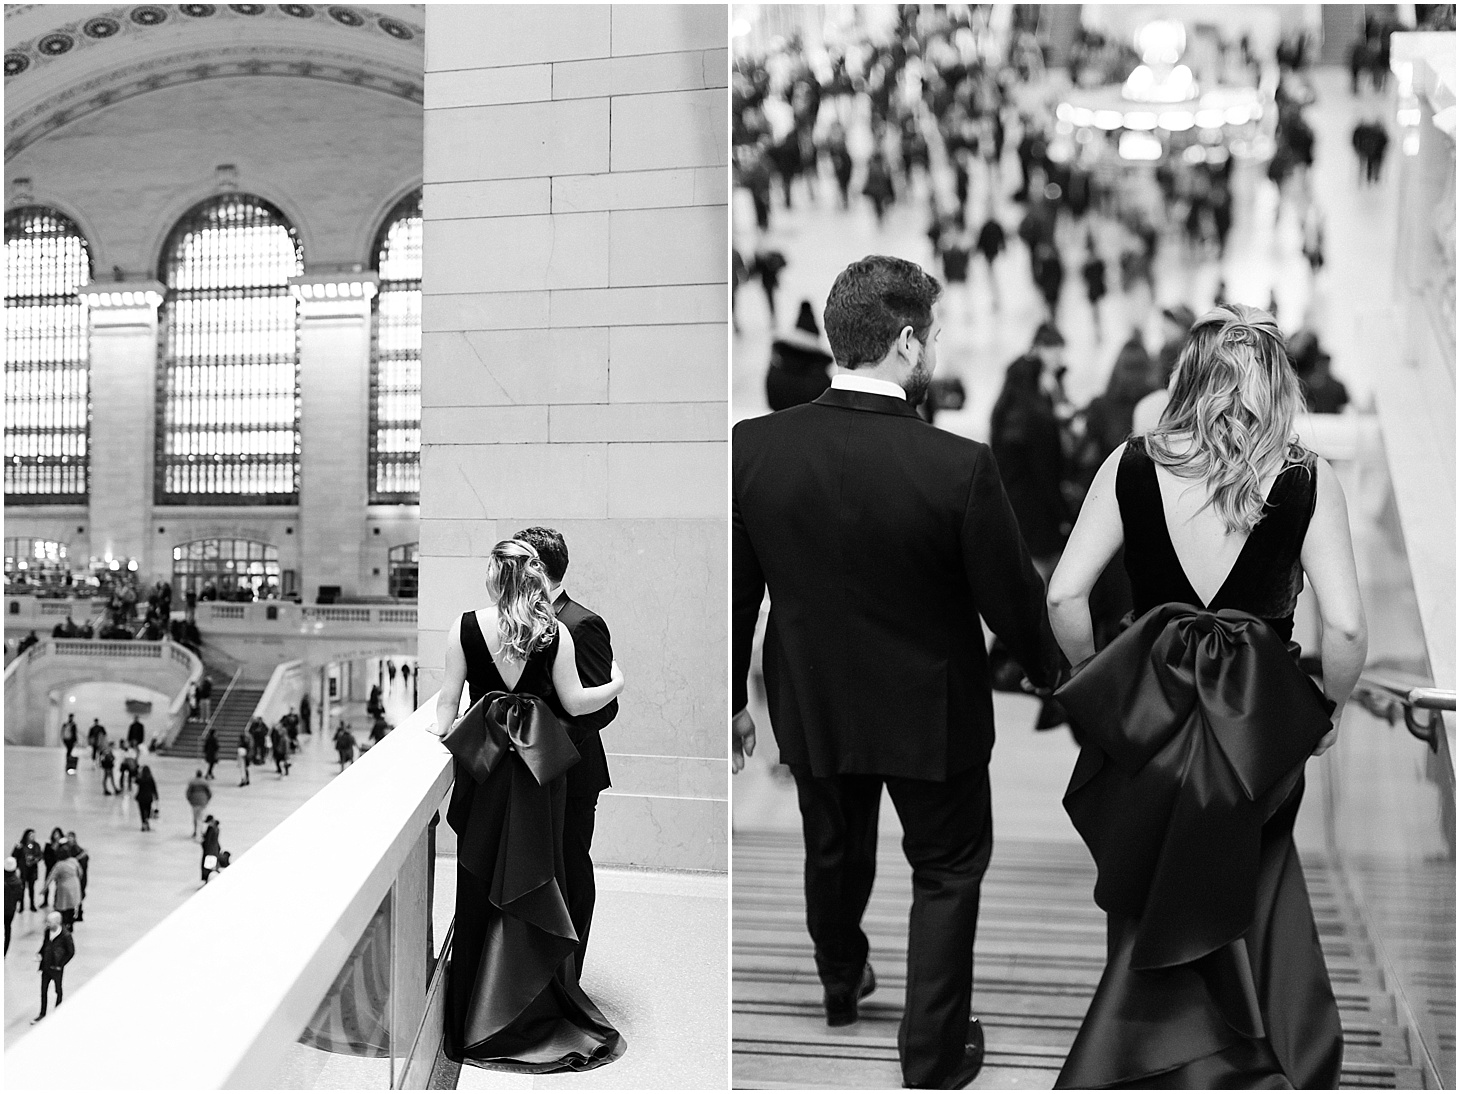 Engagement Portraits in Grand Central Station | Sunrise Engagement at the Brooklyn Bridge, Top of Rock, and Grand Central Station | Sarah Bradshaw Photography